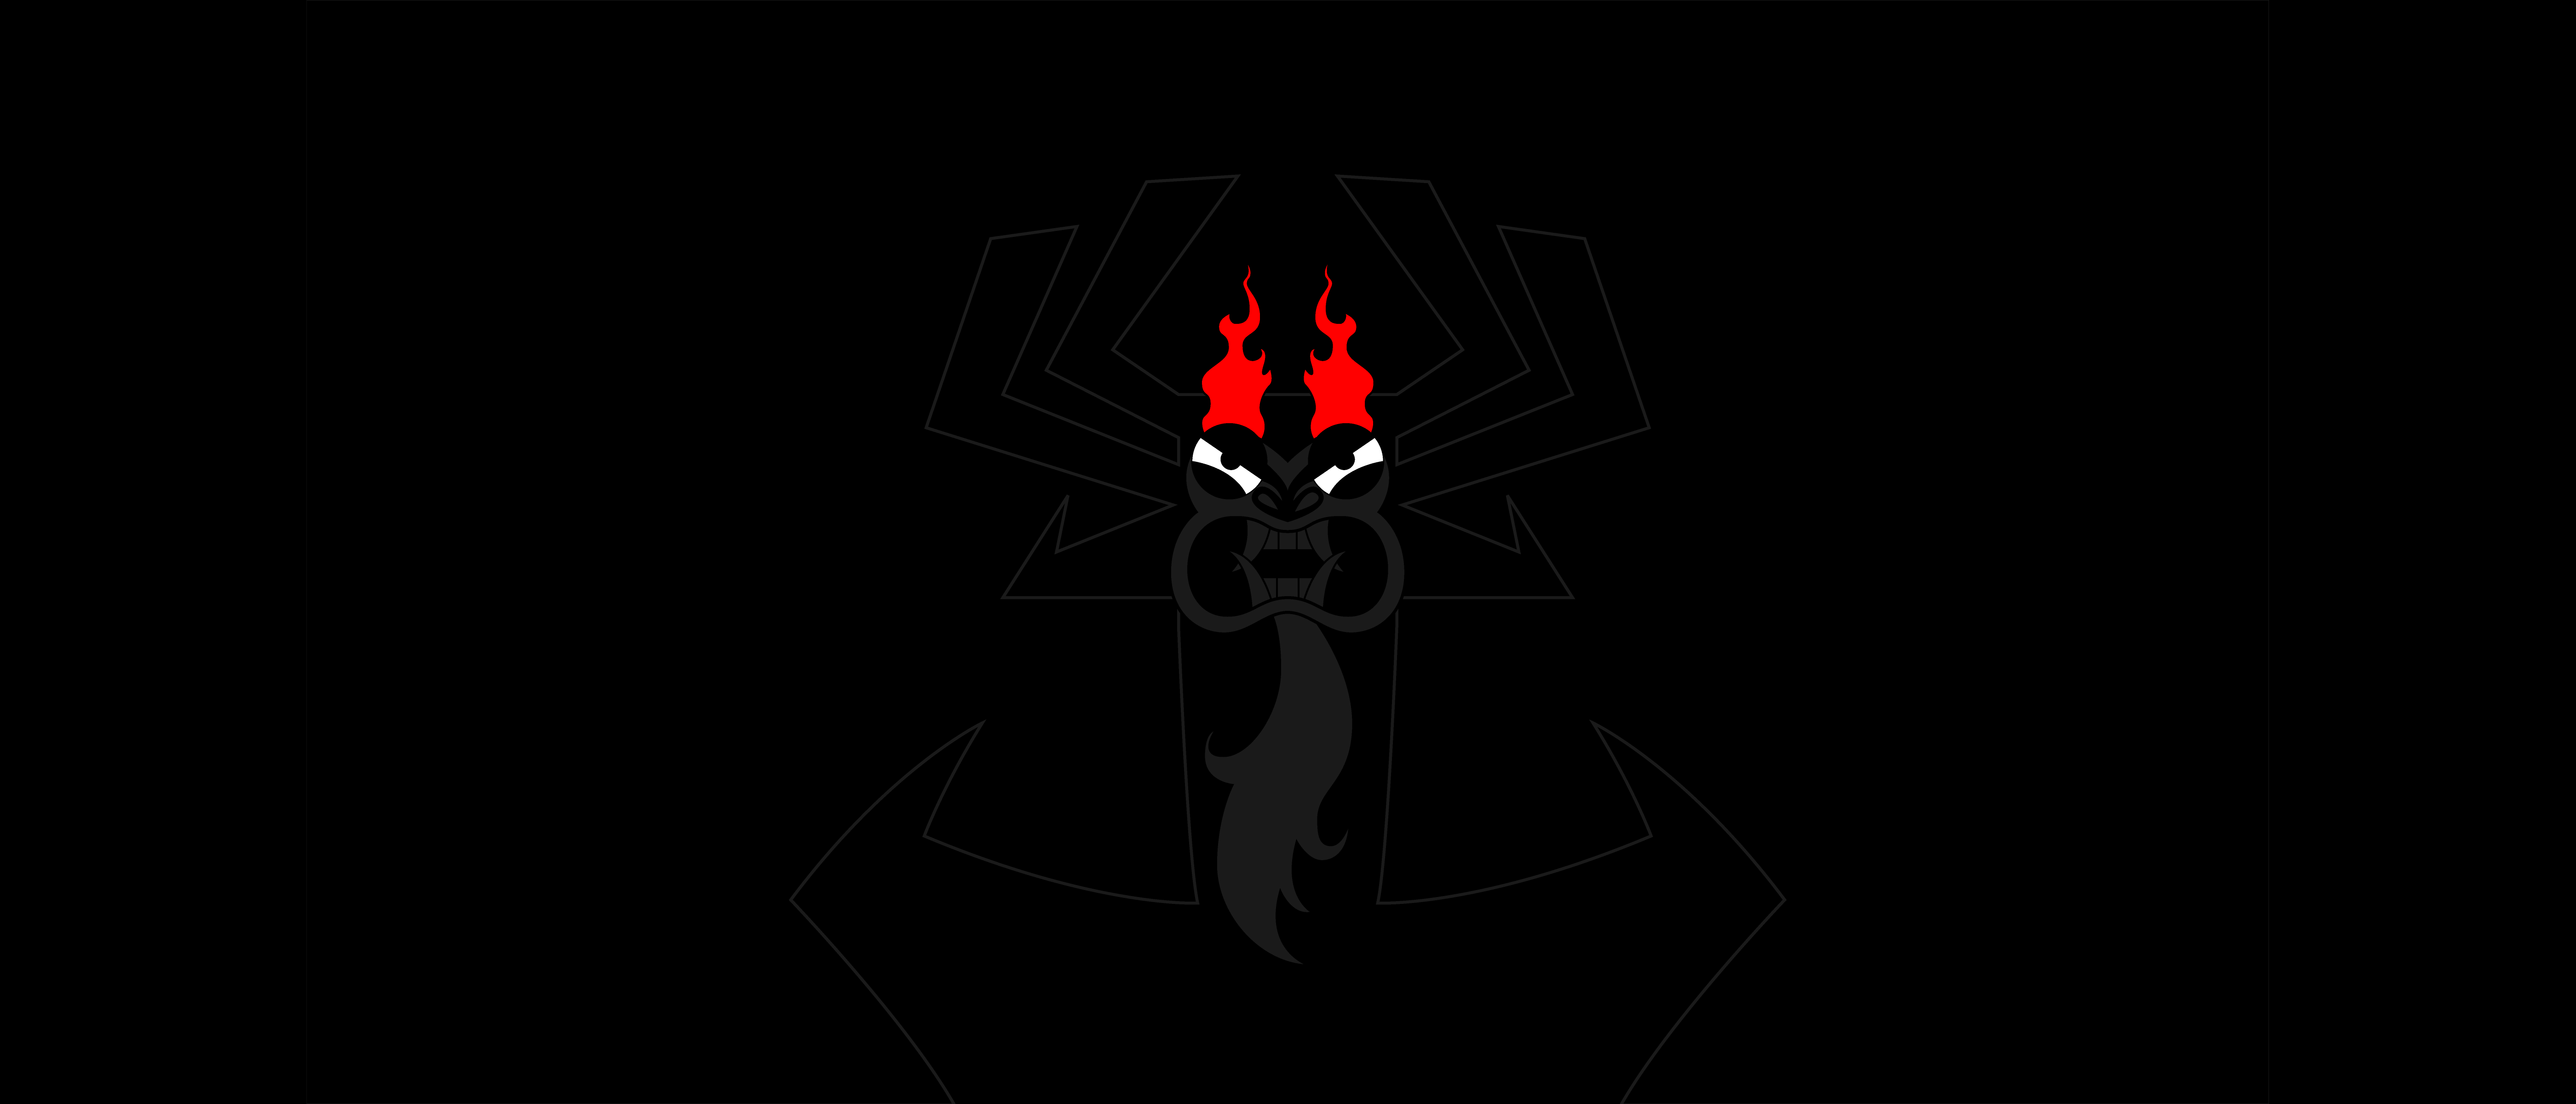 I made a wallpaper. Minimalist Aku. Size should work fine for any 9:16 monitor